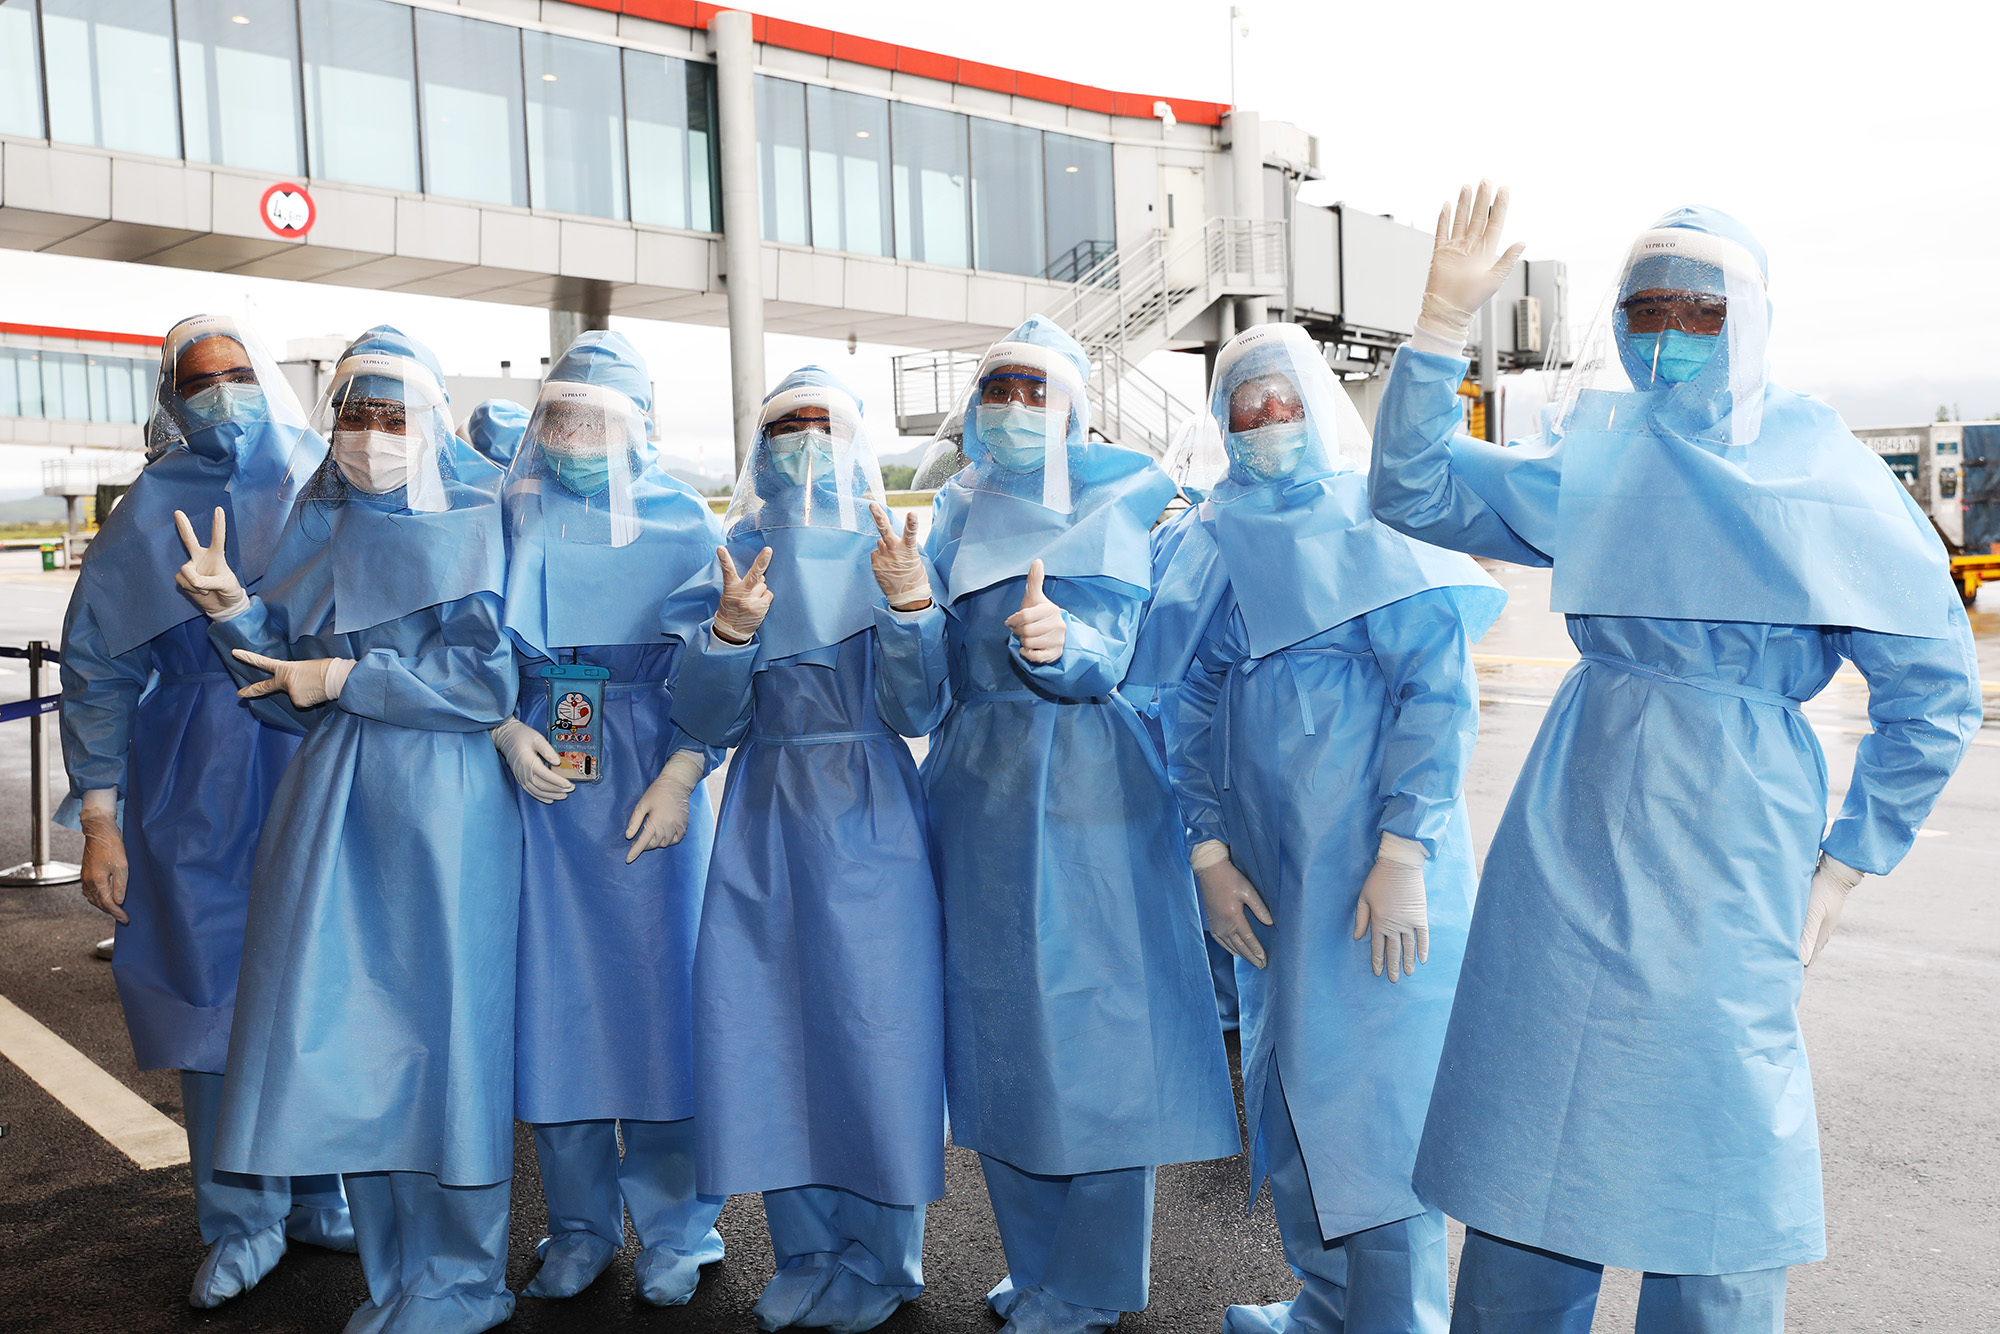  Crew members are provided with special protective clothing during their flights and medical checks at Van Don International Airport.